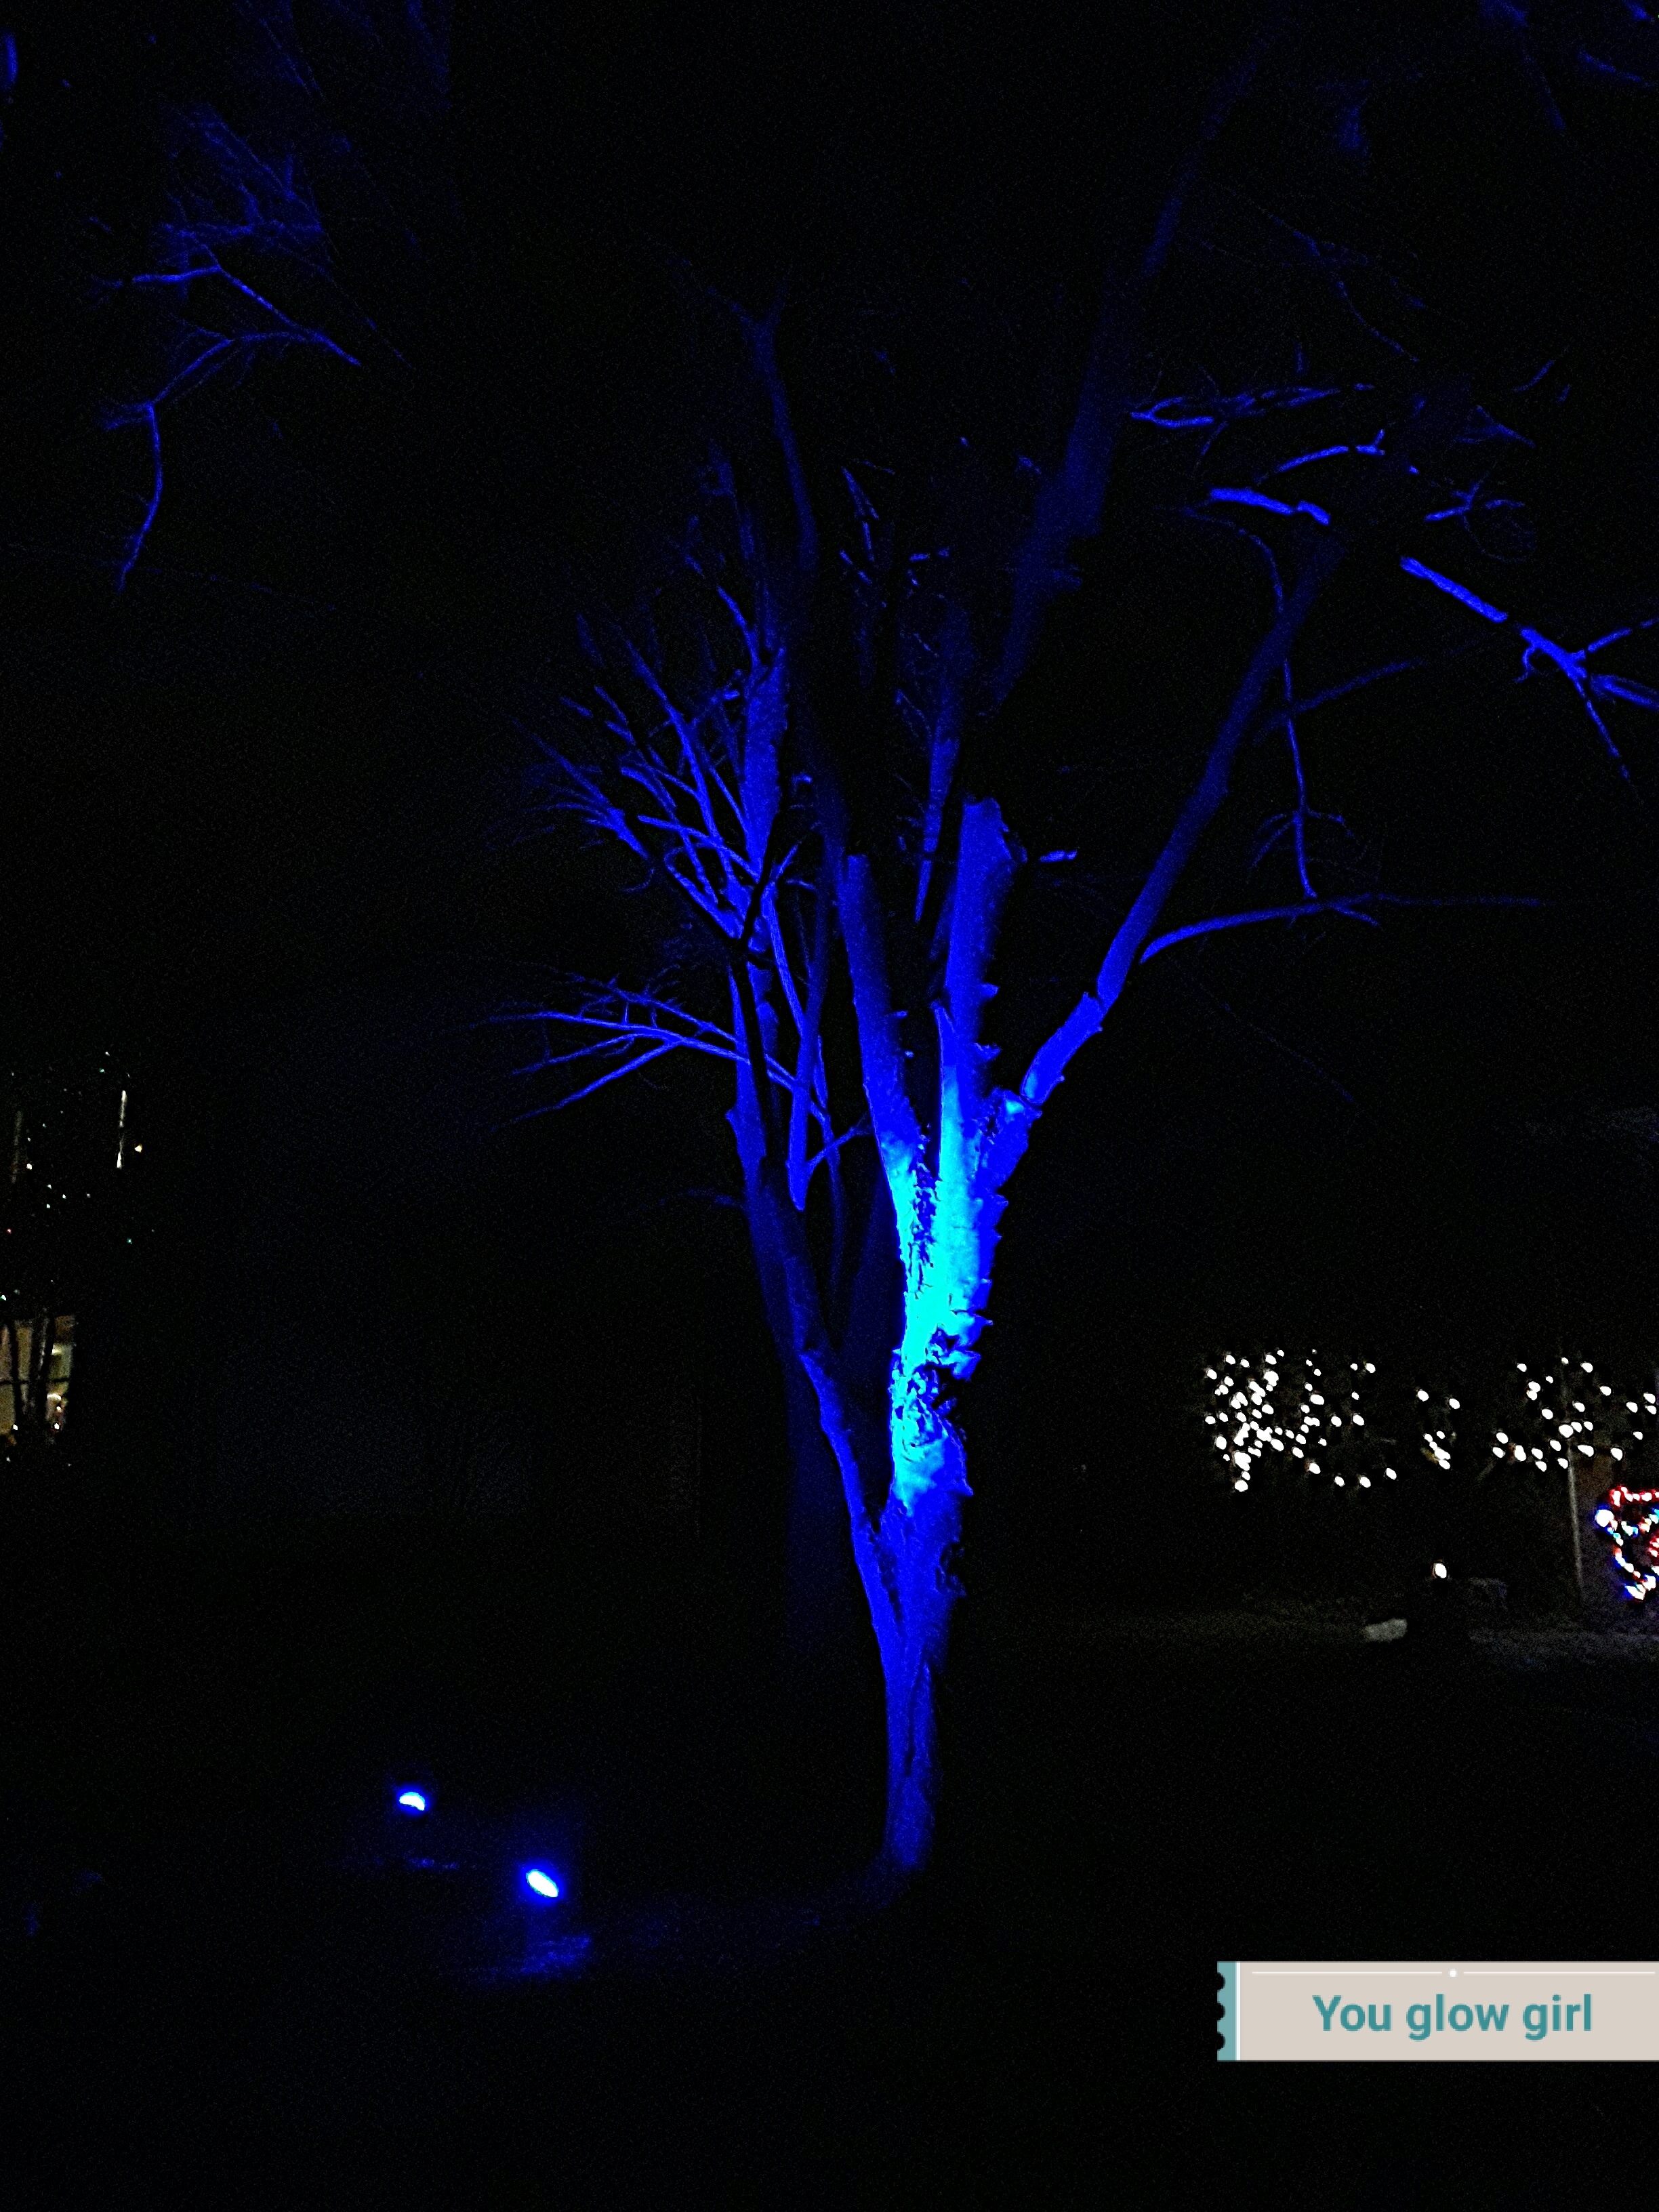 blue floodlights illuminate the maple tree trunk and branches